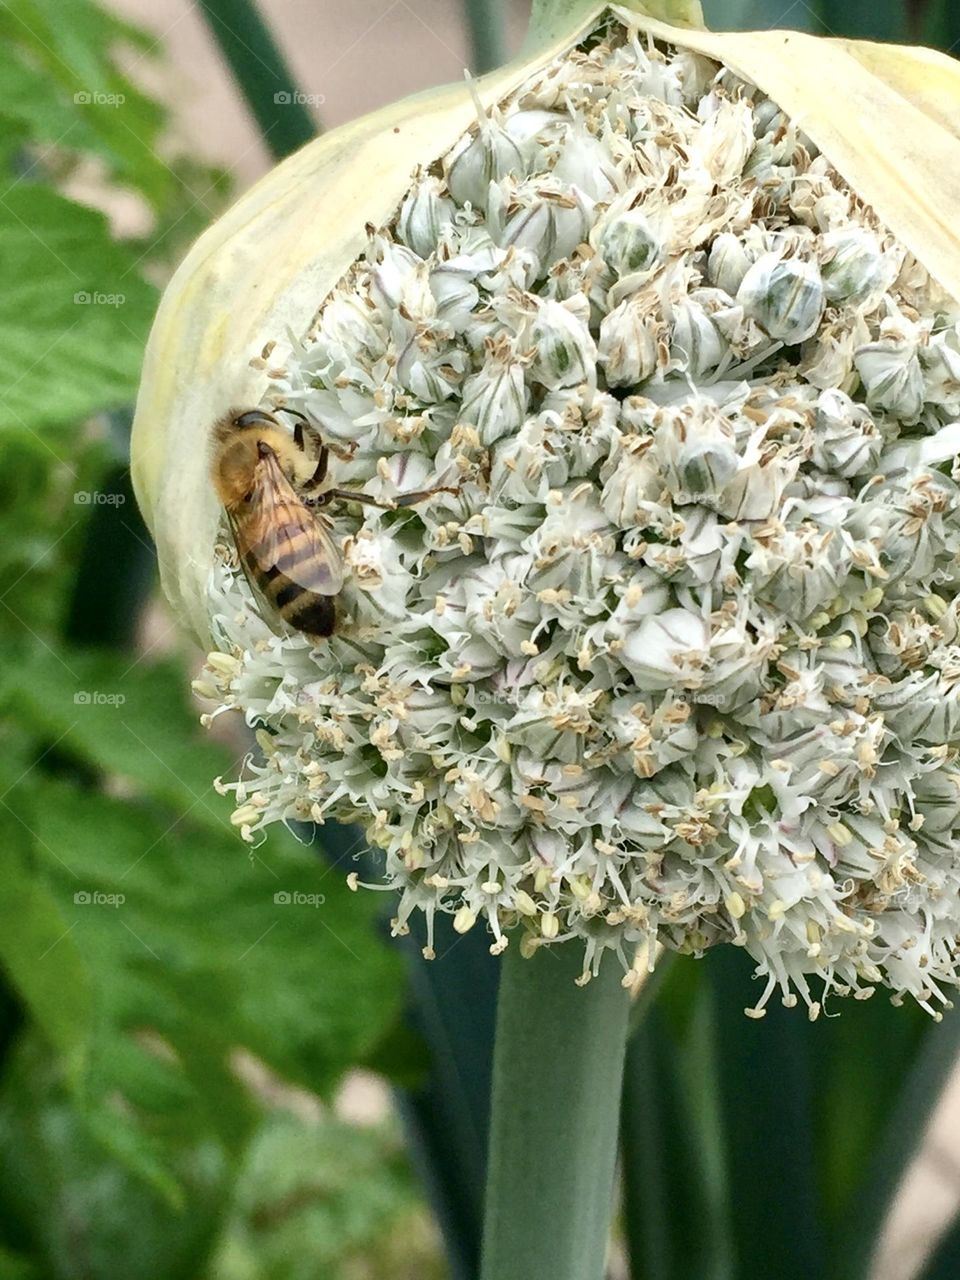 Fuzzy Plant with Bee